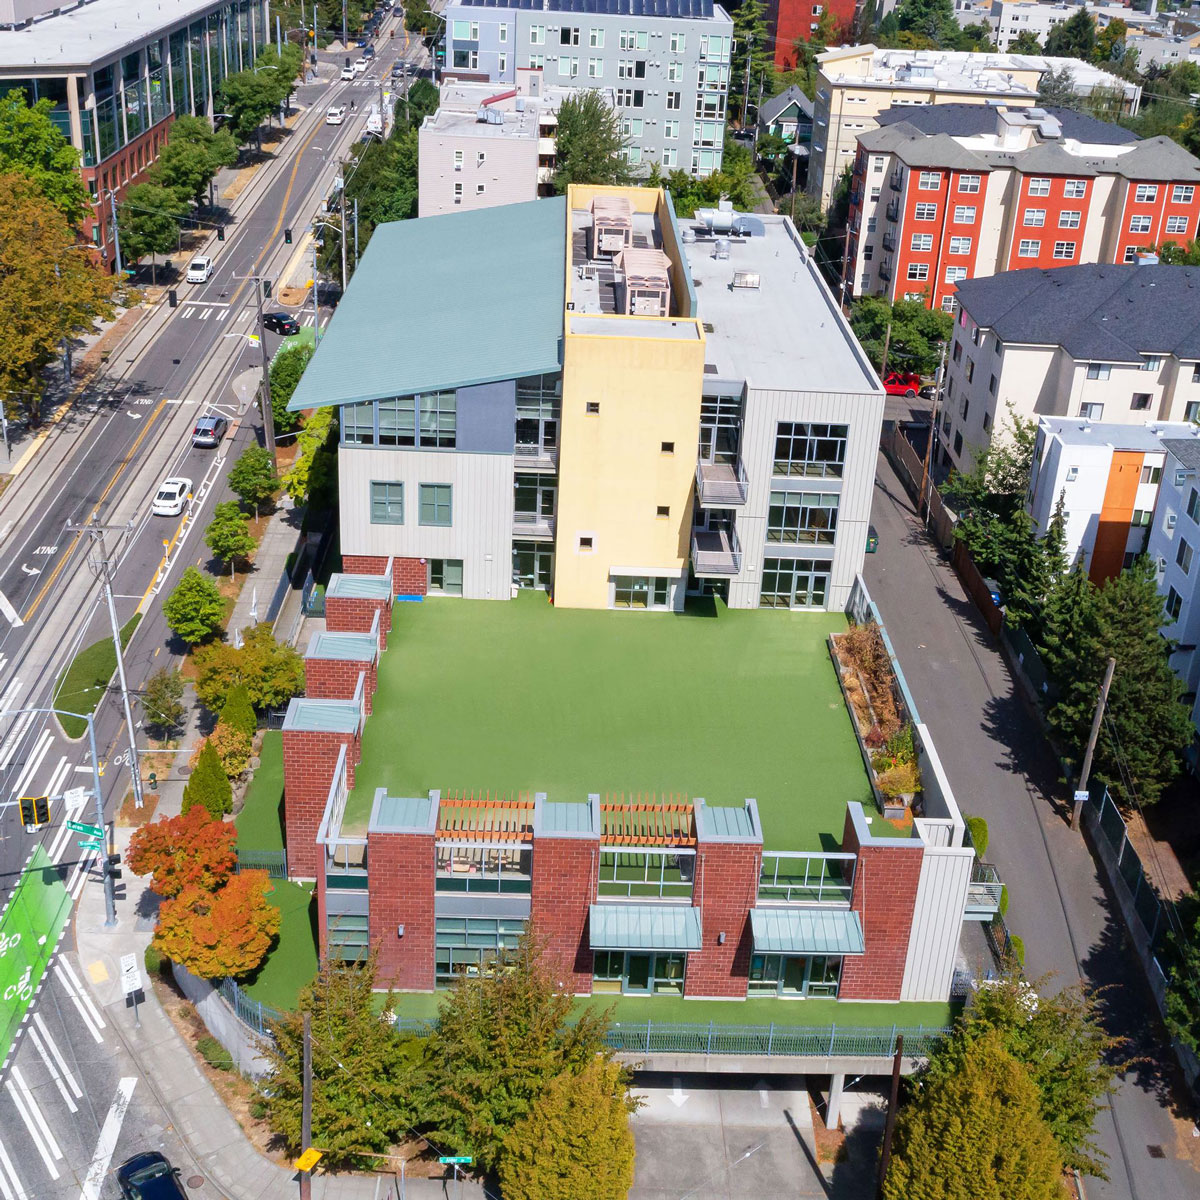 Cascade Public Media&#039;s new building, a large multistory building at a busy intersection, as seen from above